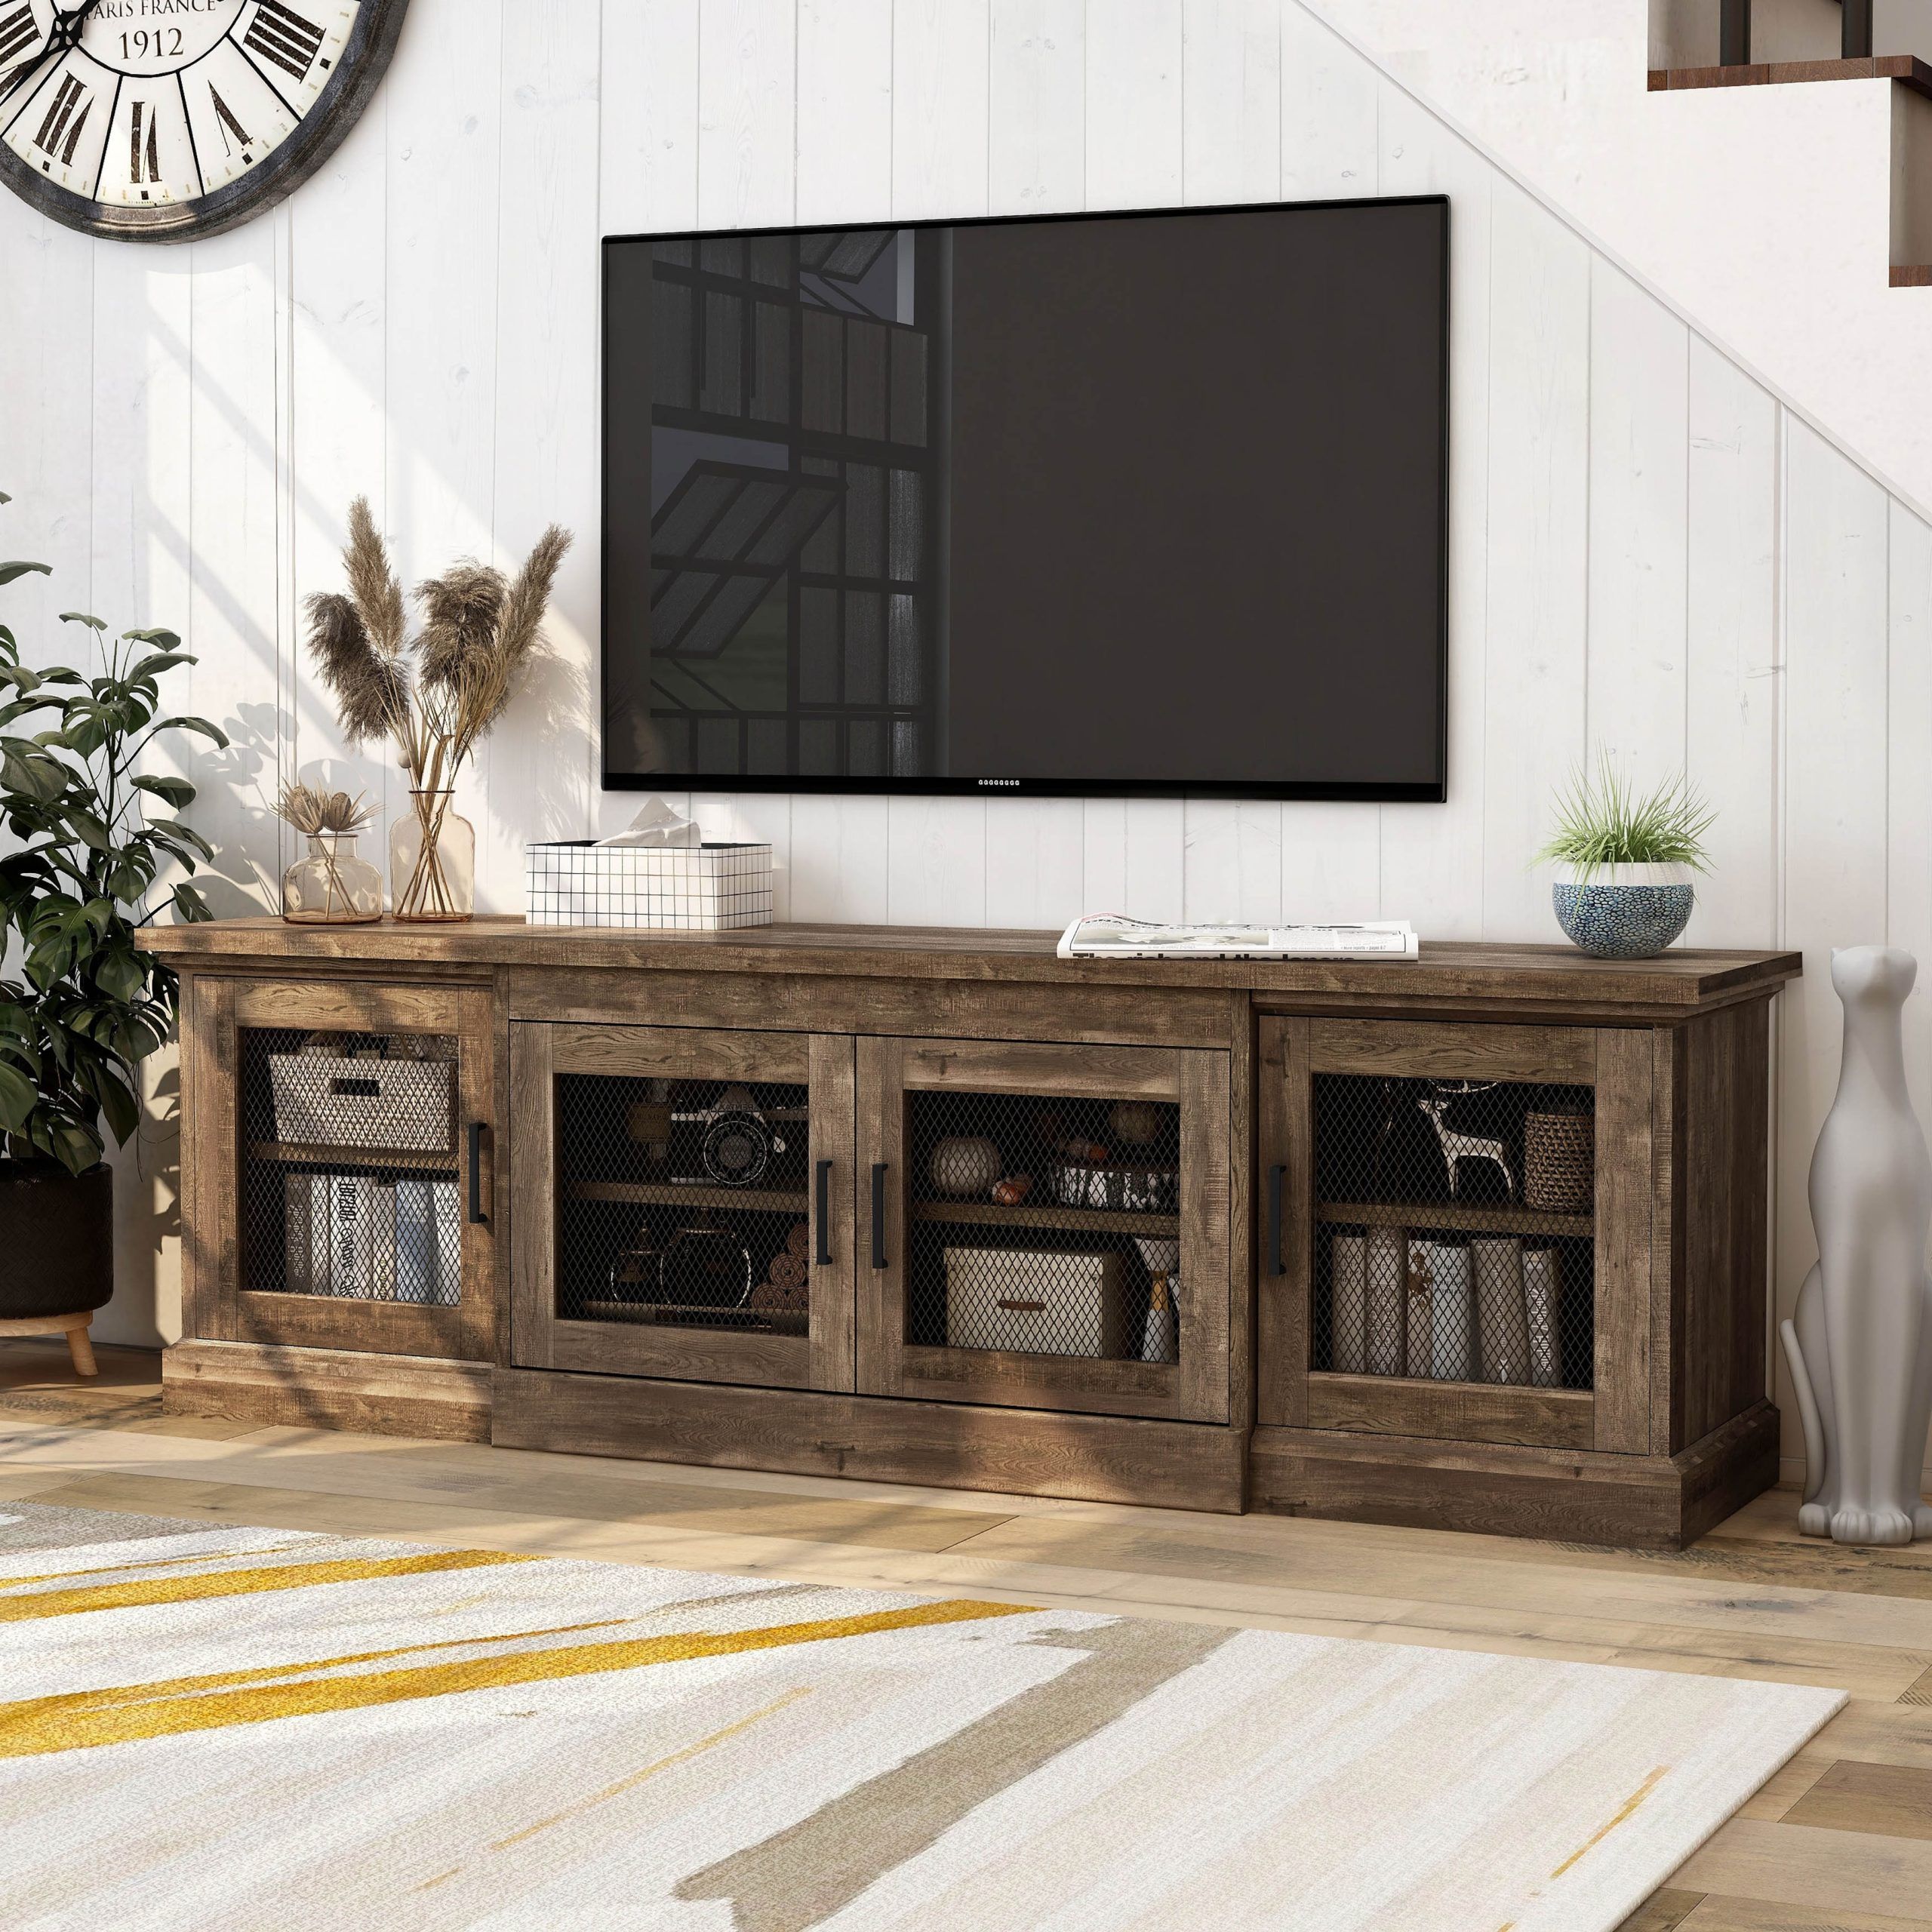 Dh Basic Rustic Reclaimed Oak 69 Inch Wide 6 Shelf Tv Standdenhour – On  Sale – Bed Bath & Beyond – 29741575 Throughout Wide Entertainment Centers (View 10 of 15)